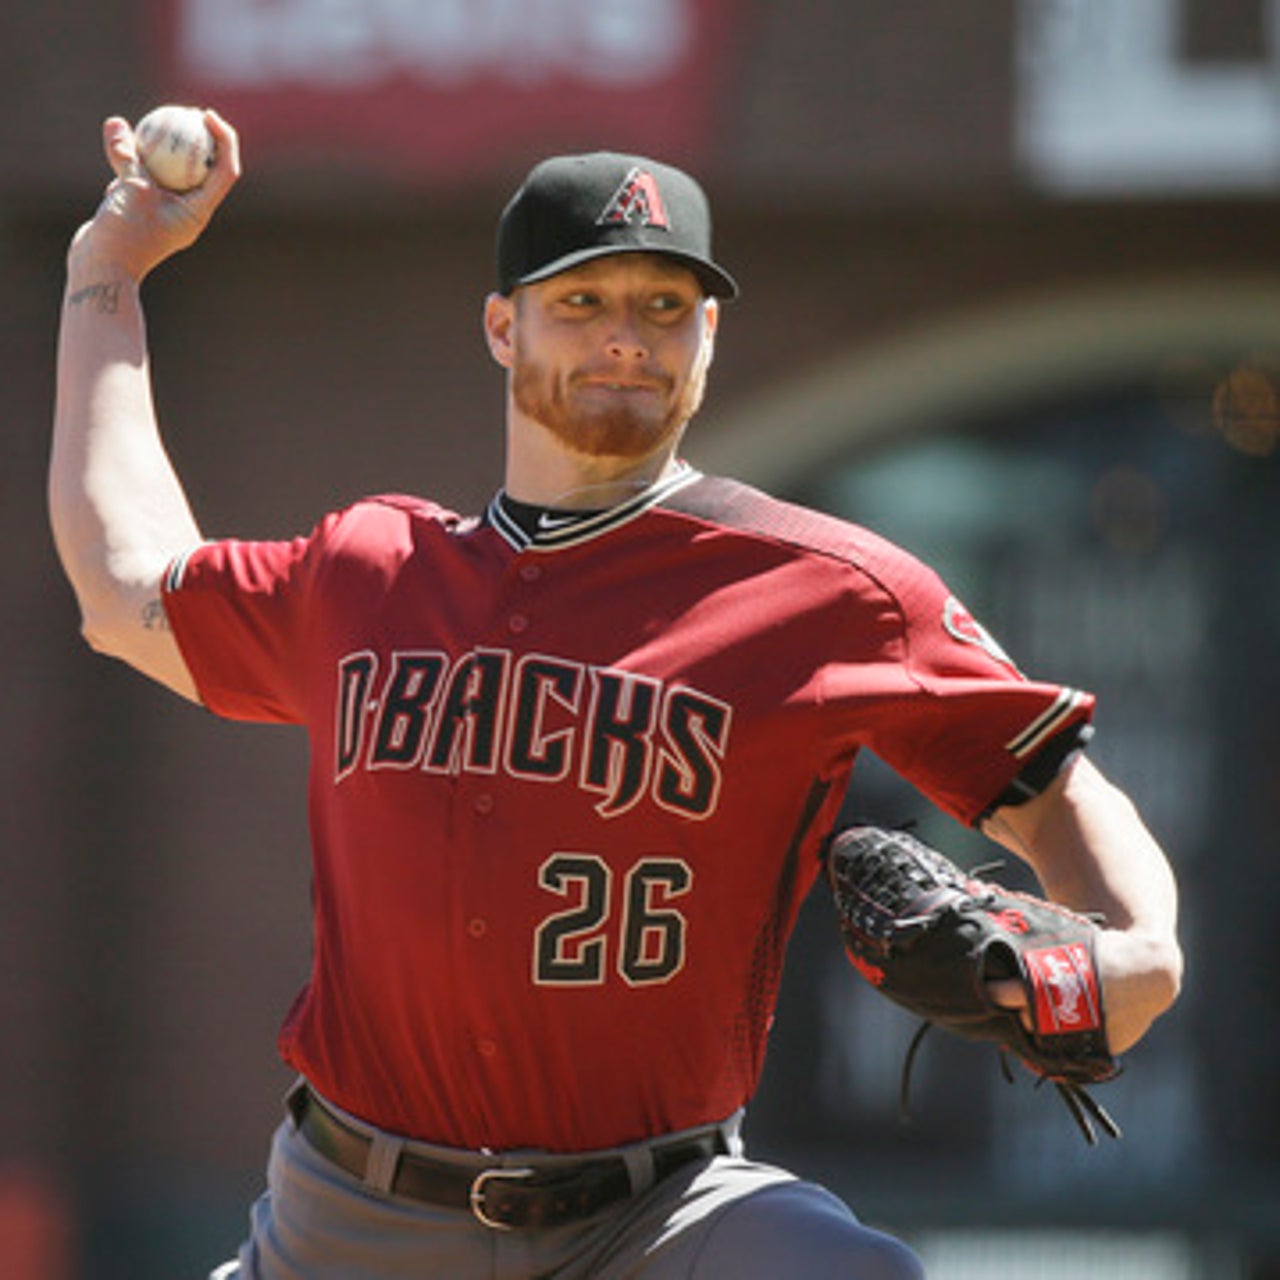 Diamondbacks GM Dave Stewart: I'm happy with our play, but we can be better